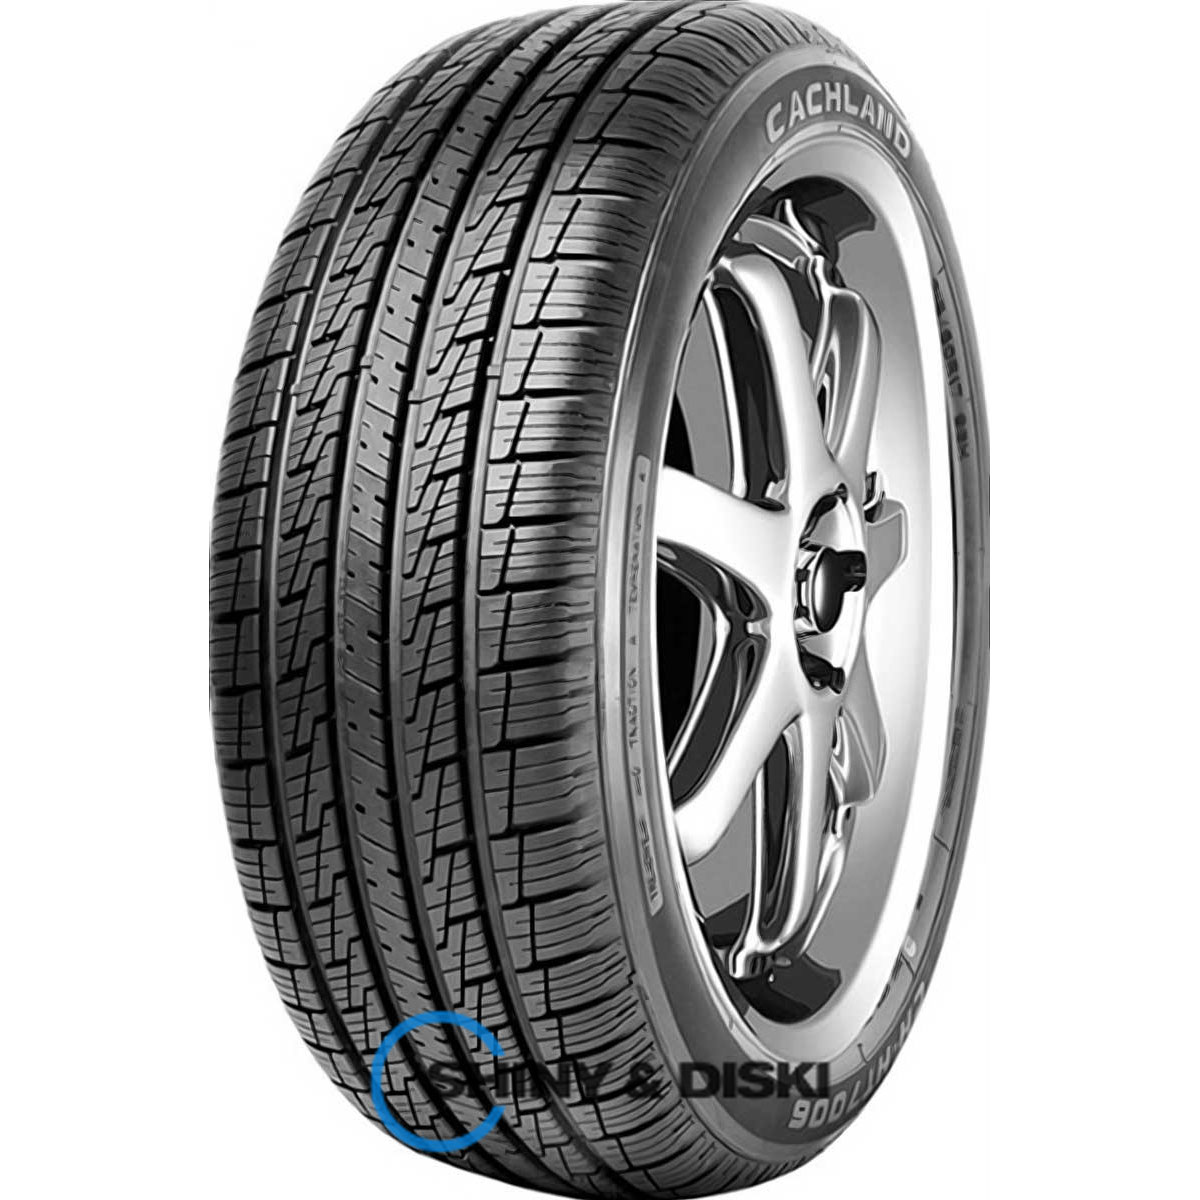 cachland ch-ht7006 225/70 r16 103h